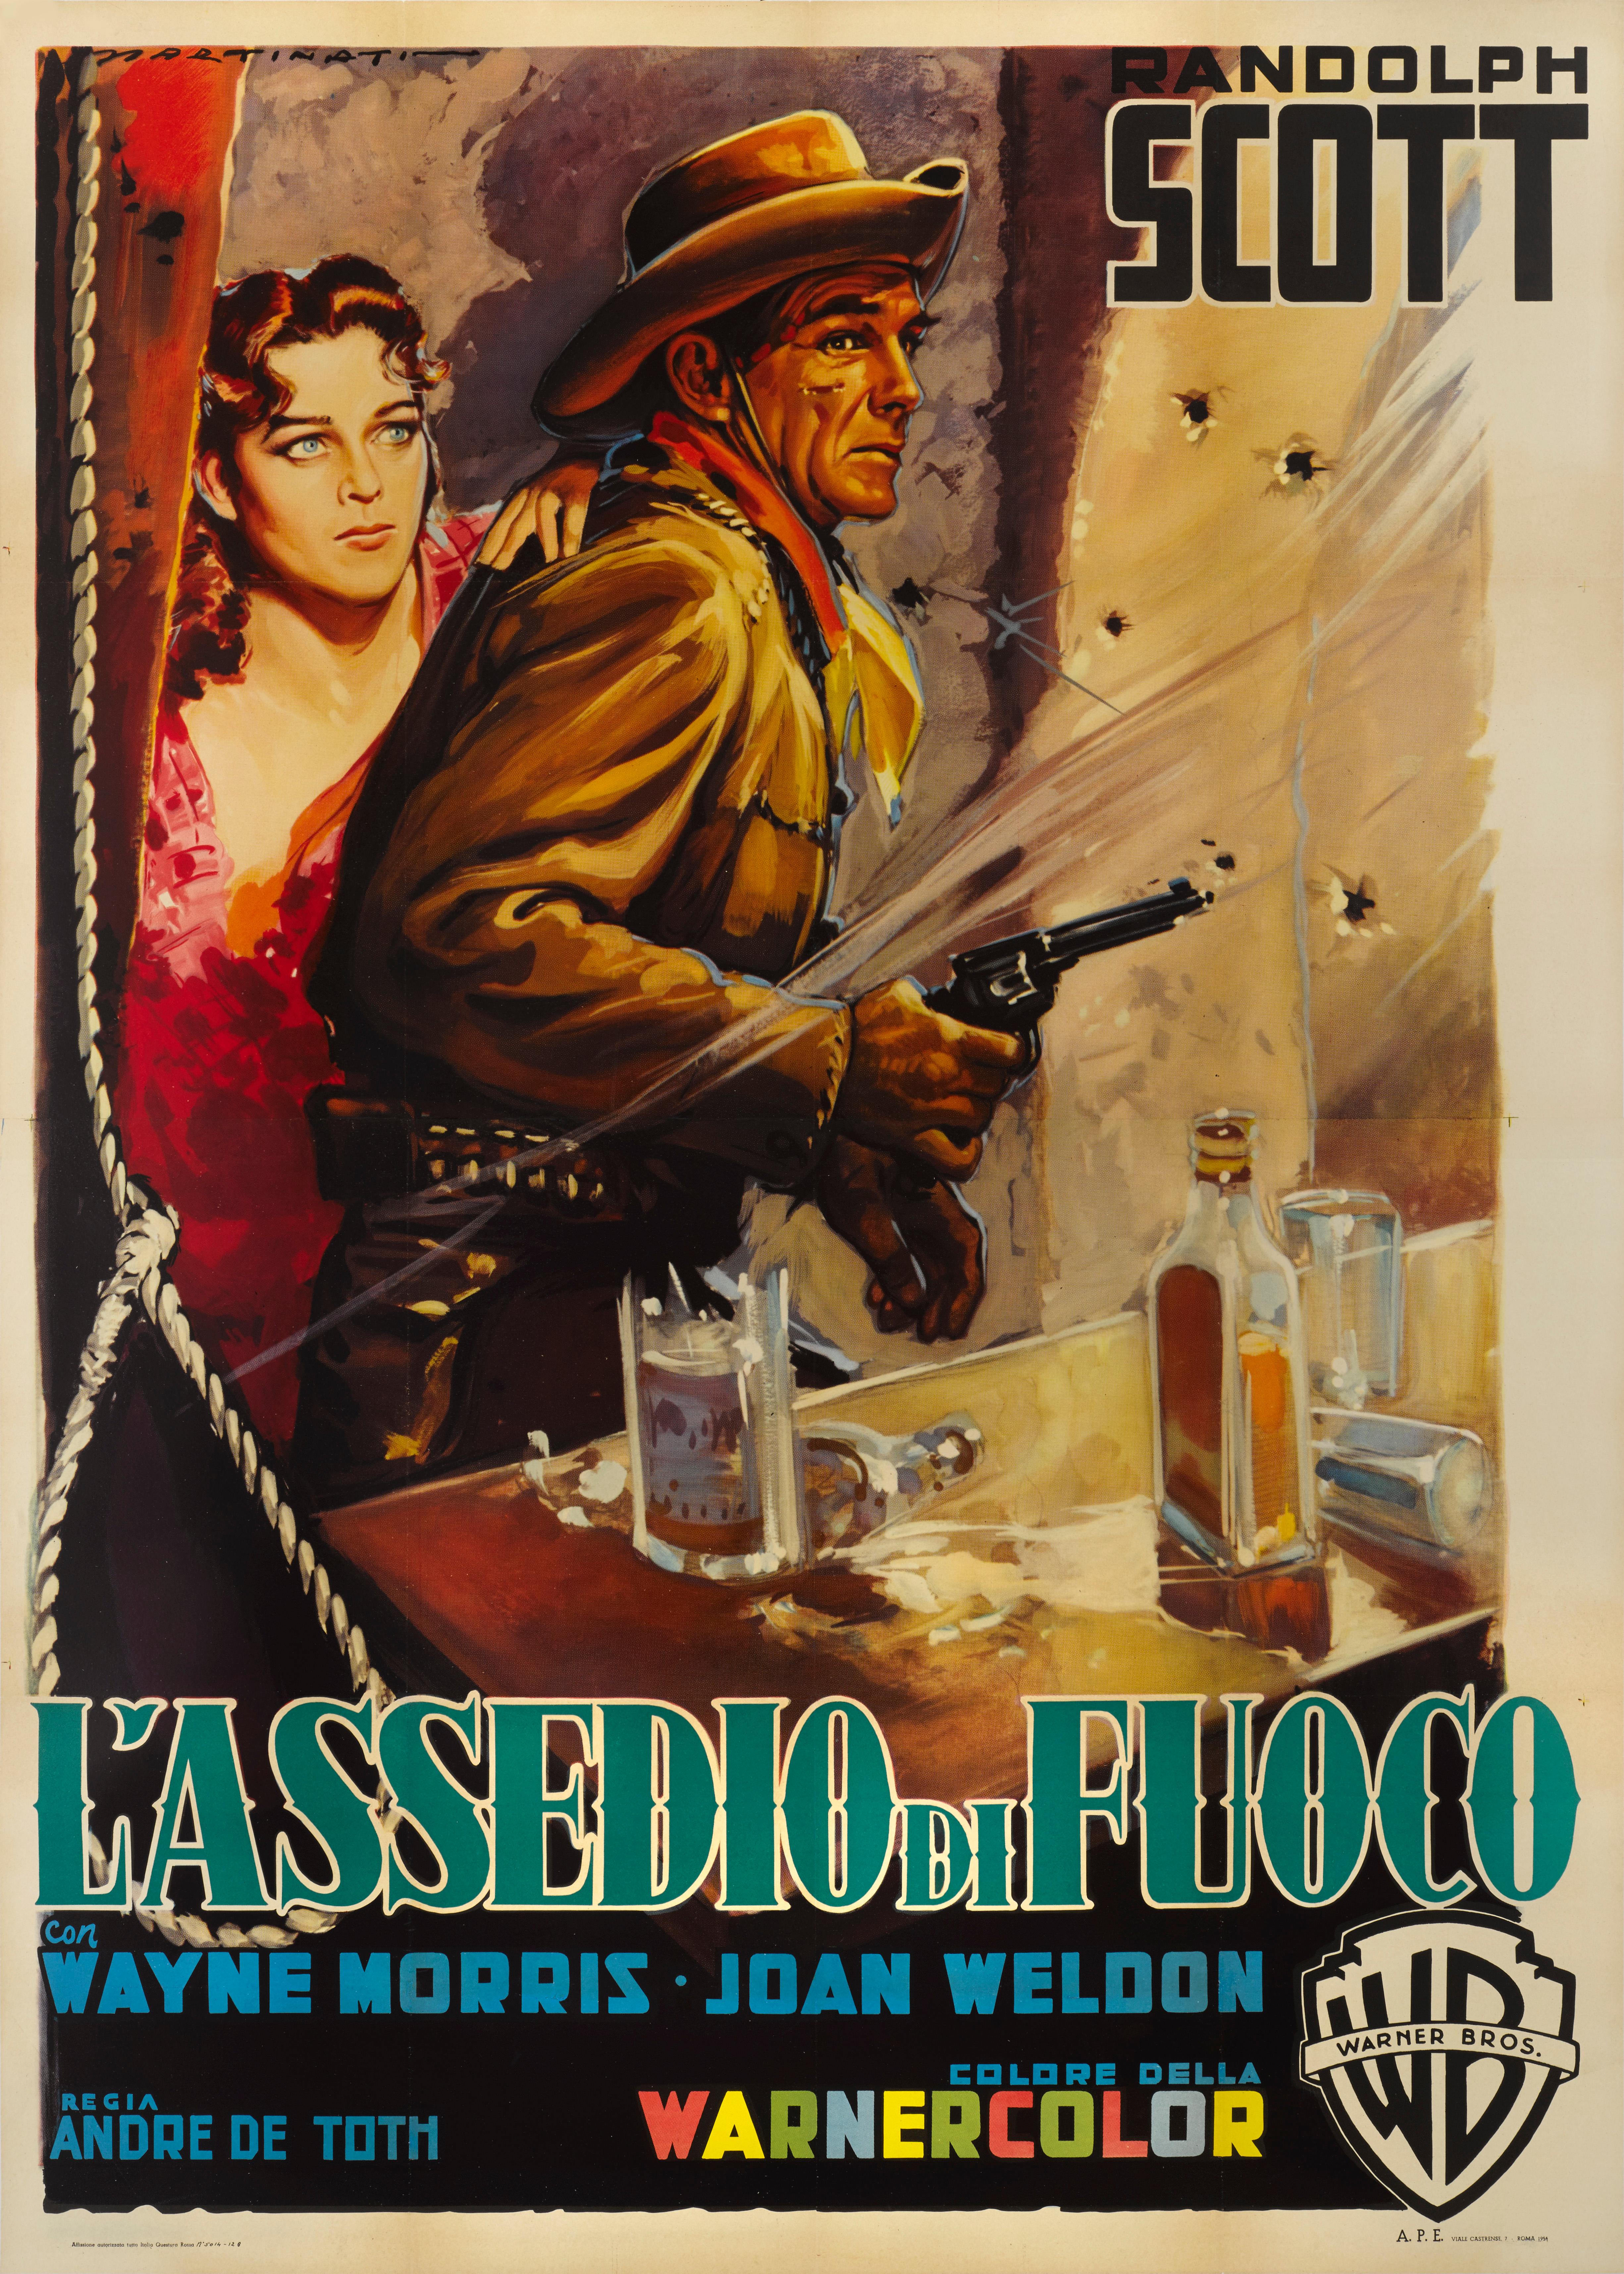 Original Italian film poster for White Heat, 1954.
This western was directed by Andre DeToth, and stars Randolph Scott, Wayne Morris and Joan Weldon. The film was based on Kenneth Taylor Perkins's 1942 short story riding solo.
Luigi Martinati is